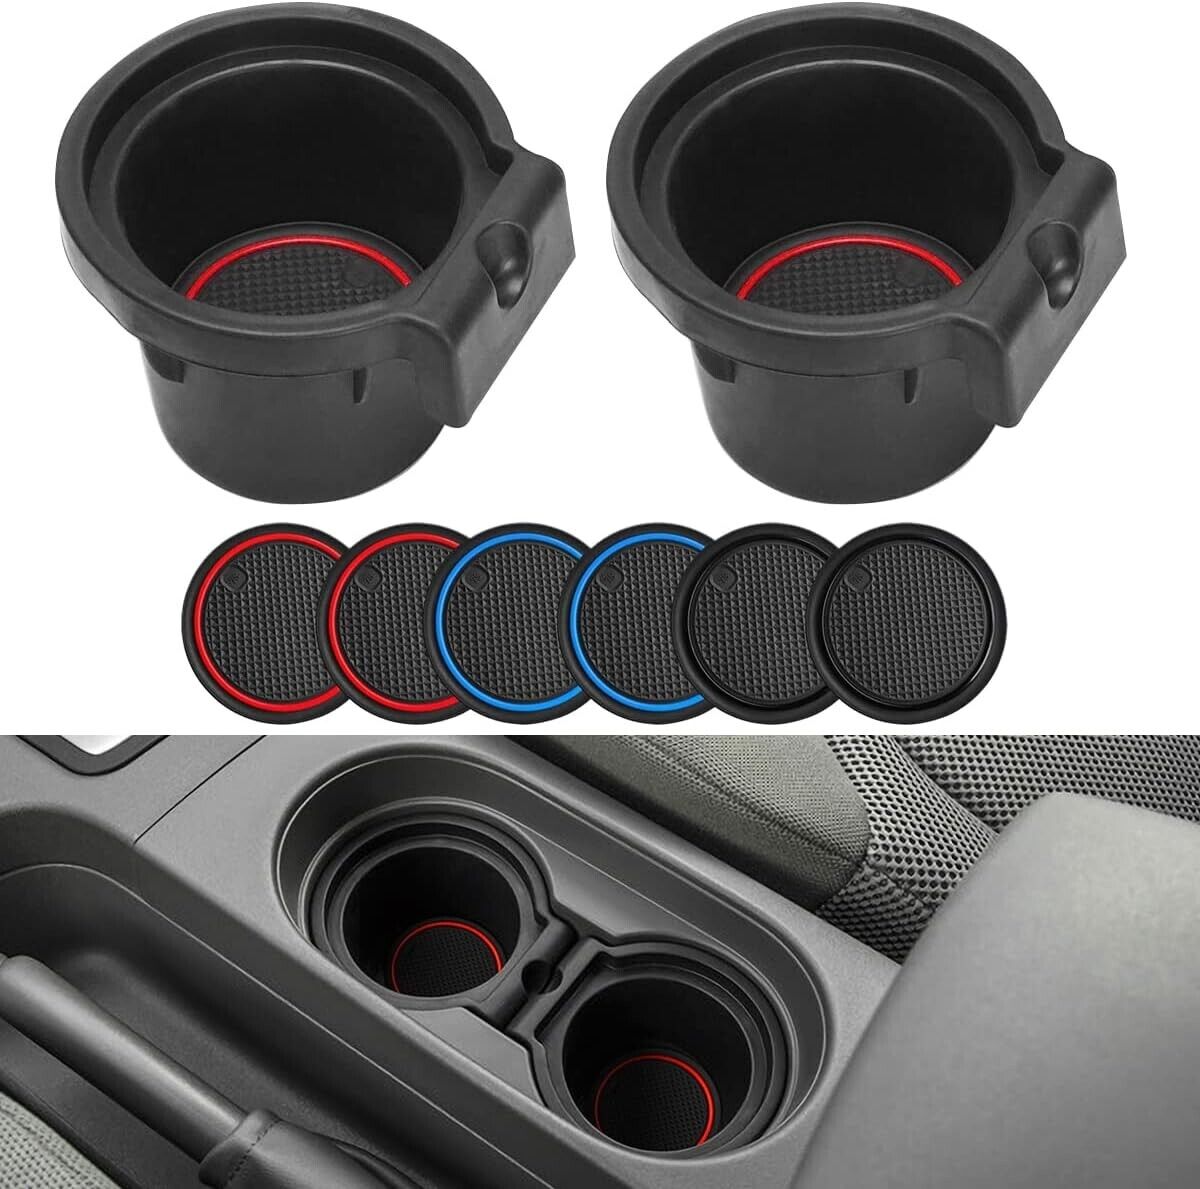 Auovo Cup Holder Inserts for Frontier 2005-2019 Xterra 05-15 Pathfinder 05-12